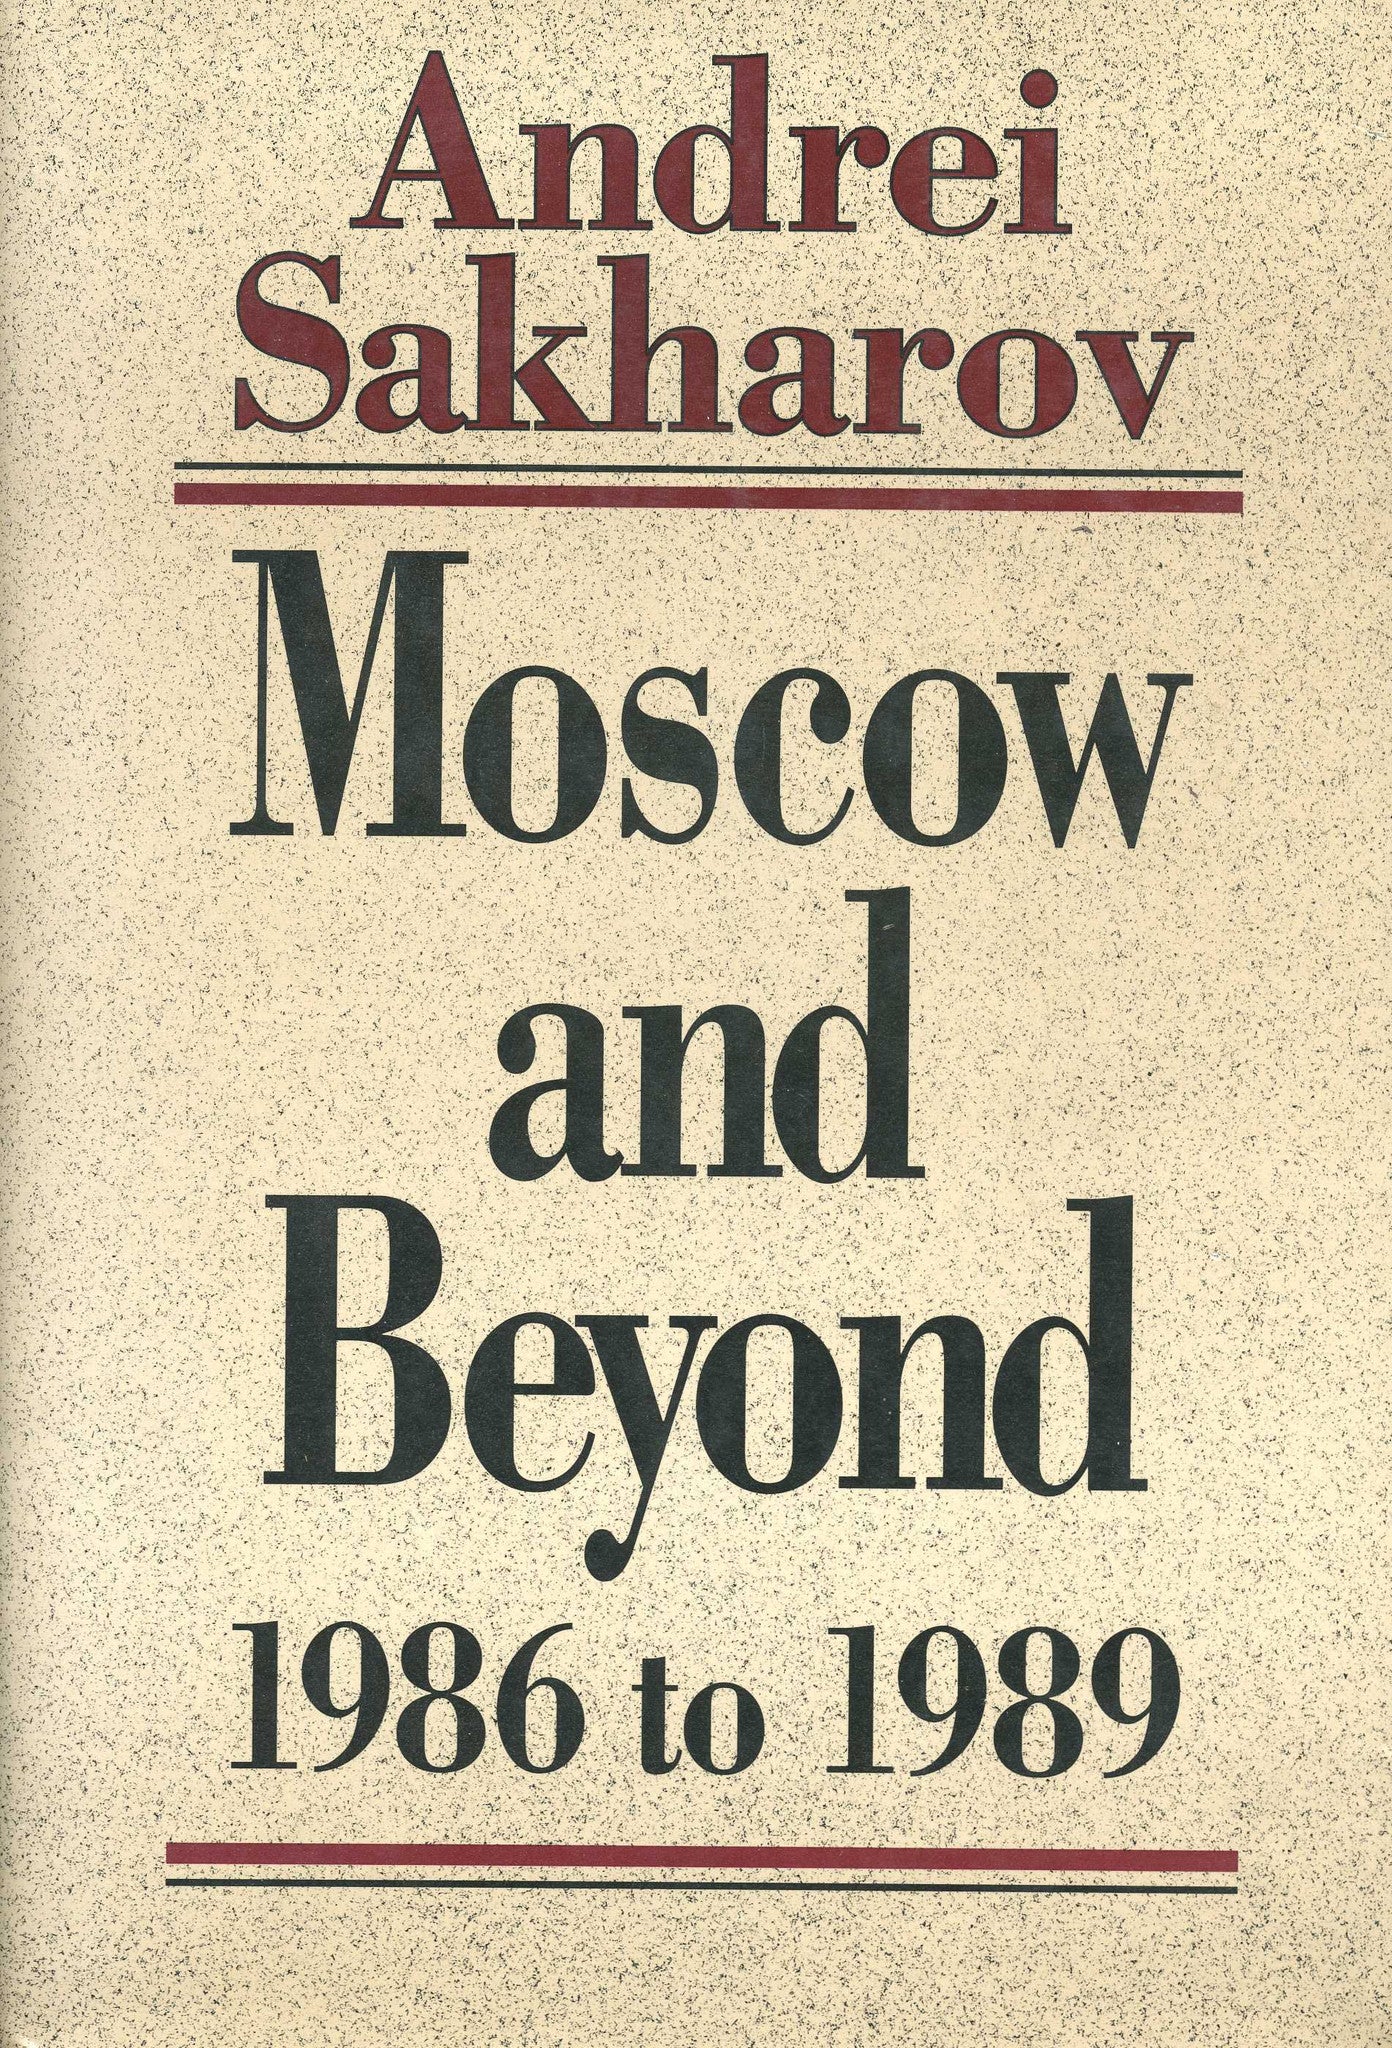 MOSCOW AND BEYOND: 1986-1989